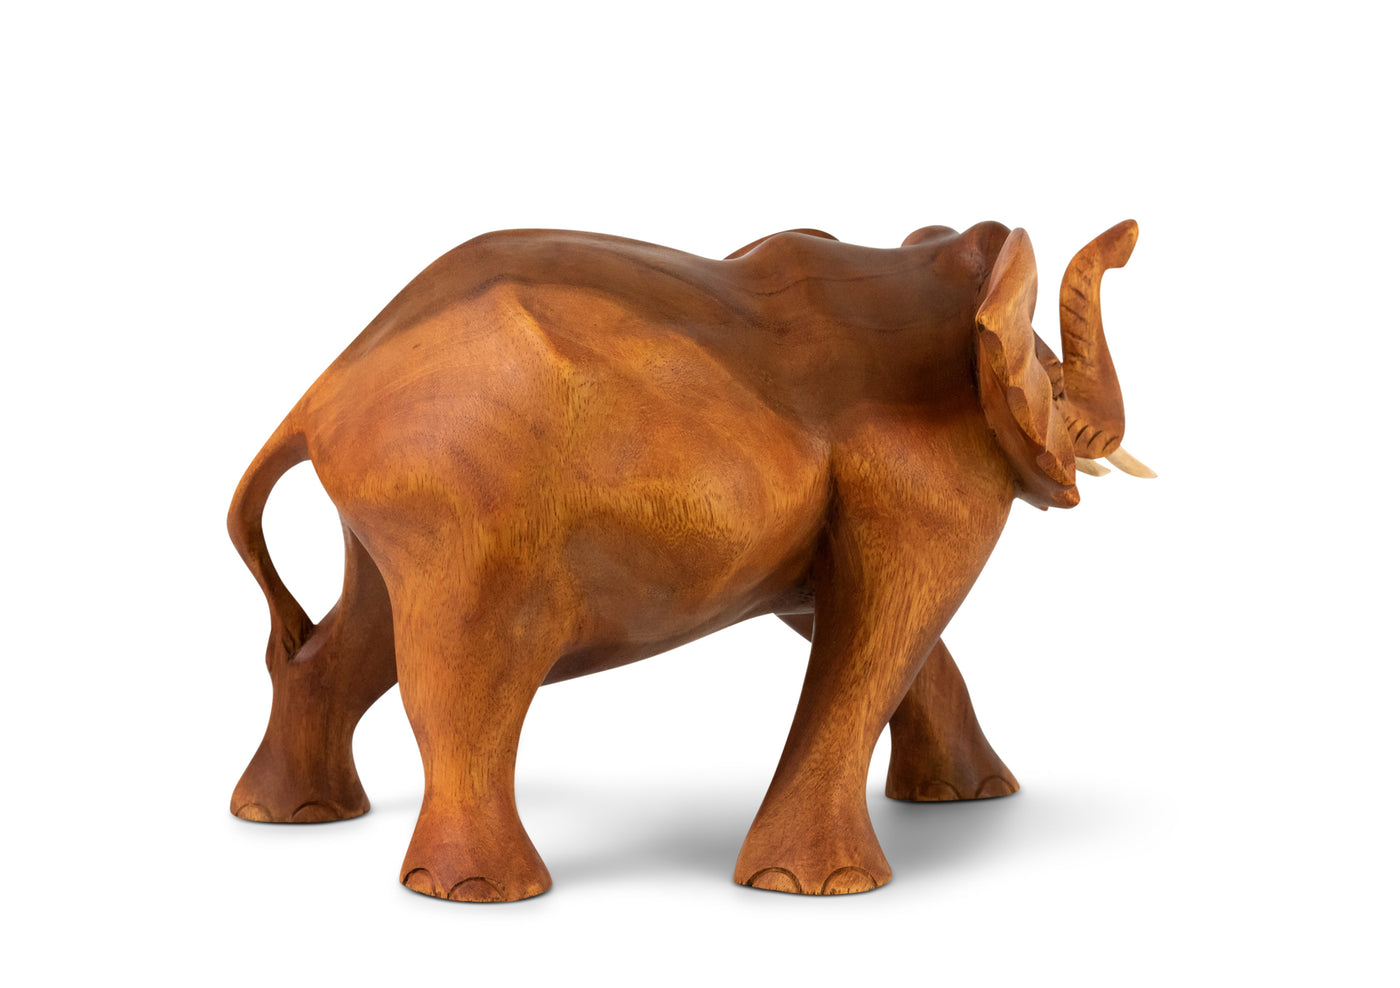 Large Wooden Hand Carved Walking Elephant Statue Figurine Sculpture Art Decorative Rustic Home Decor Accent Handmade Handcrafted Decoration